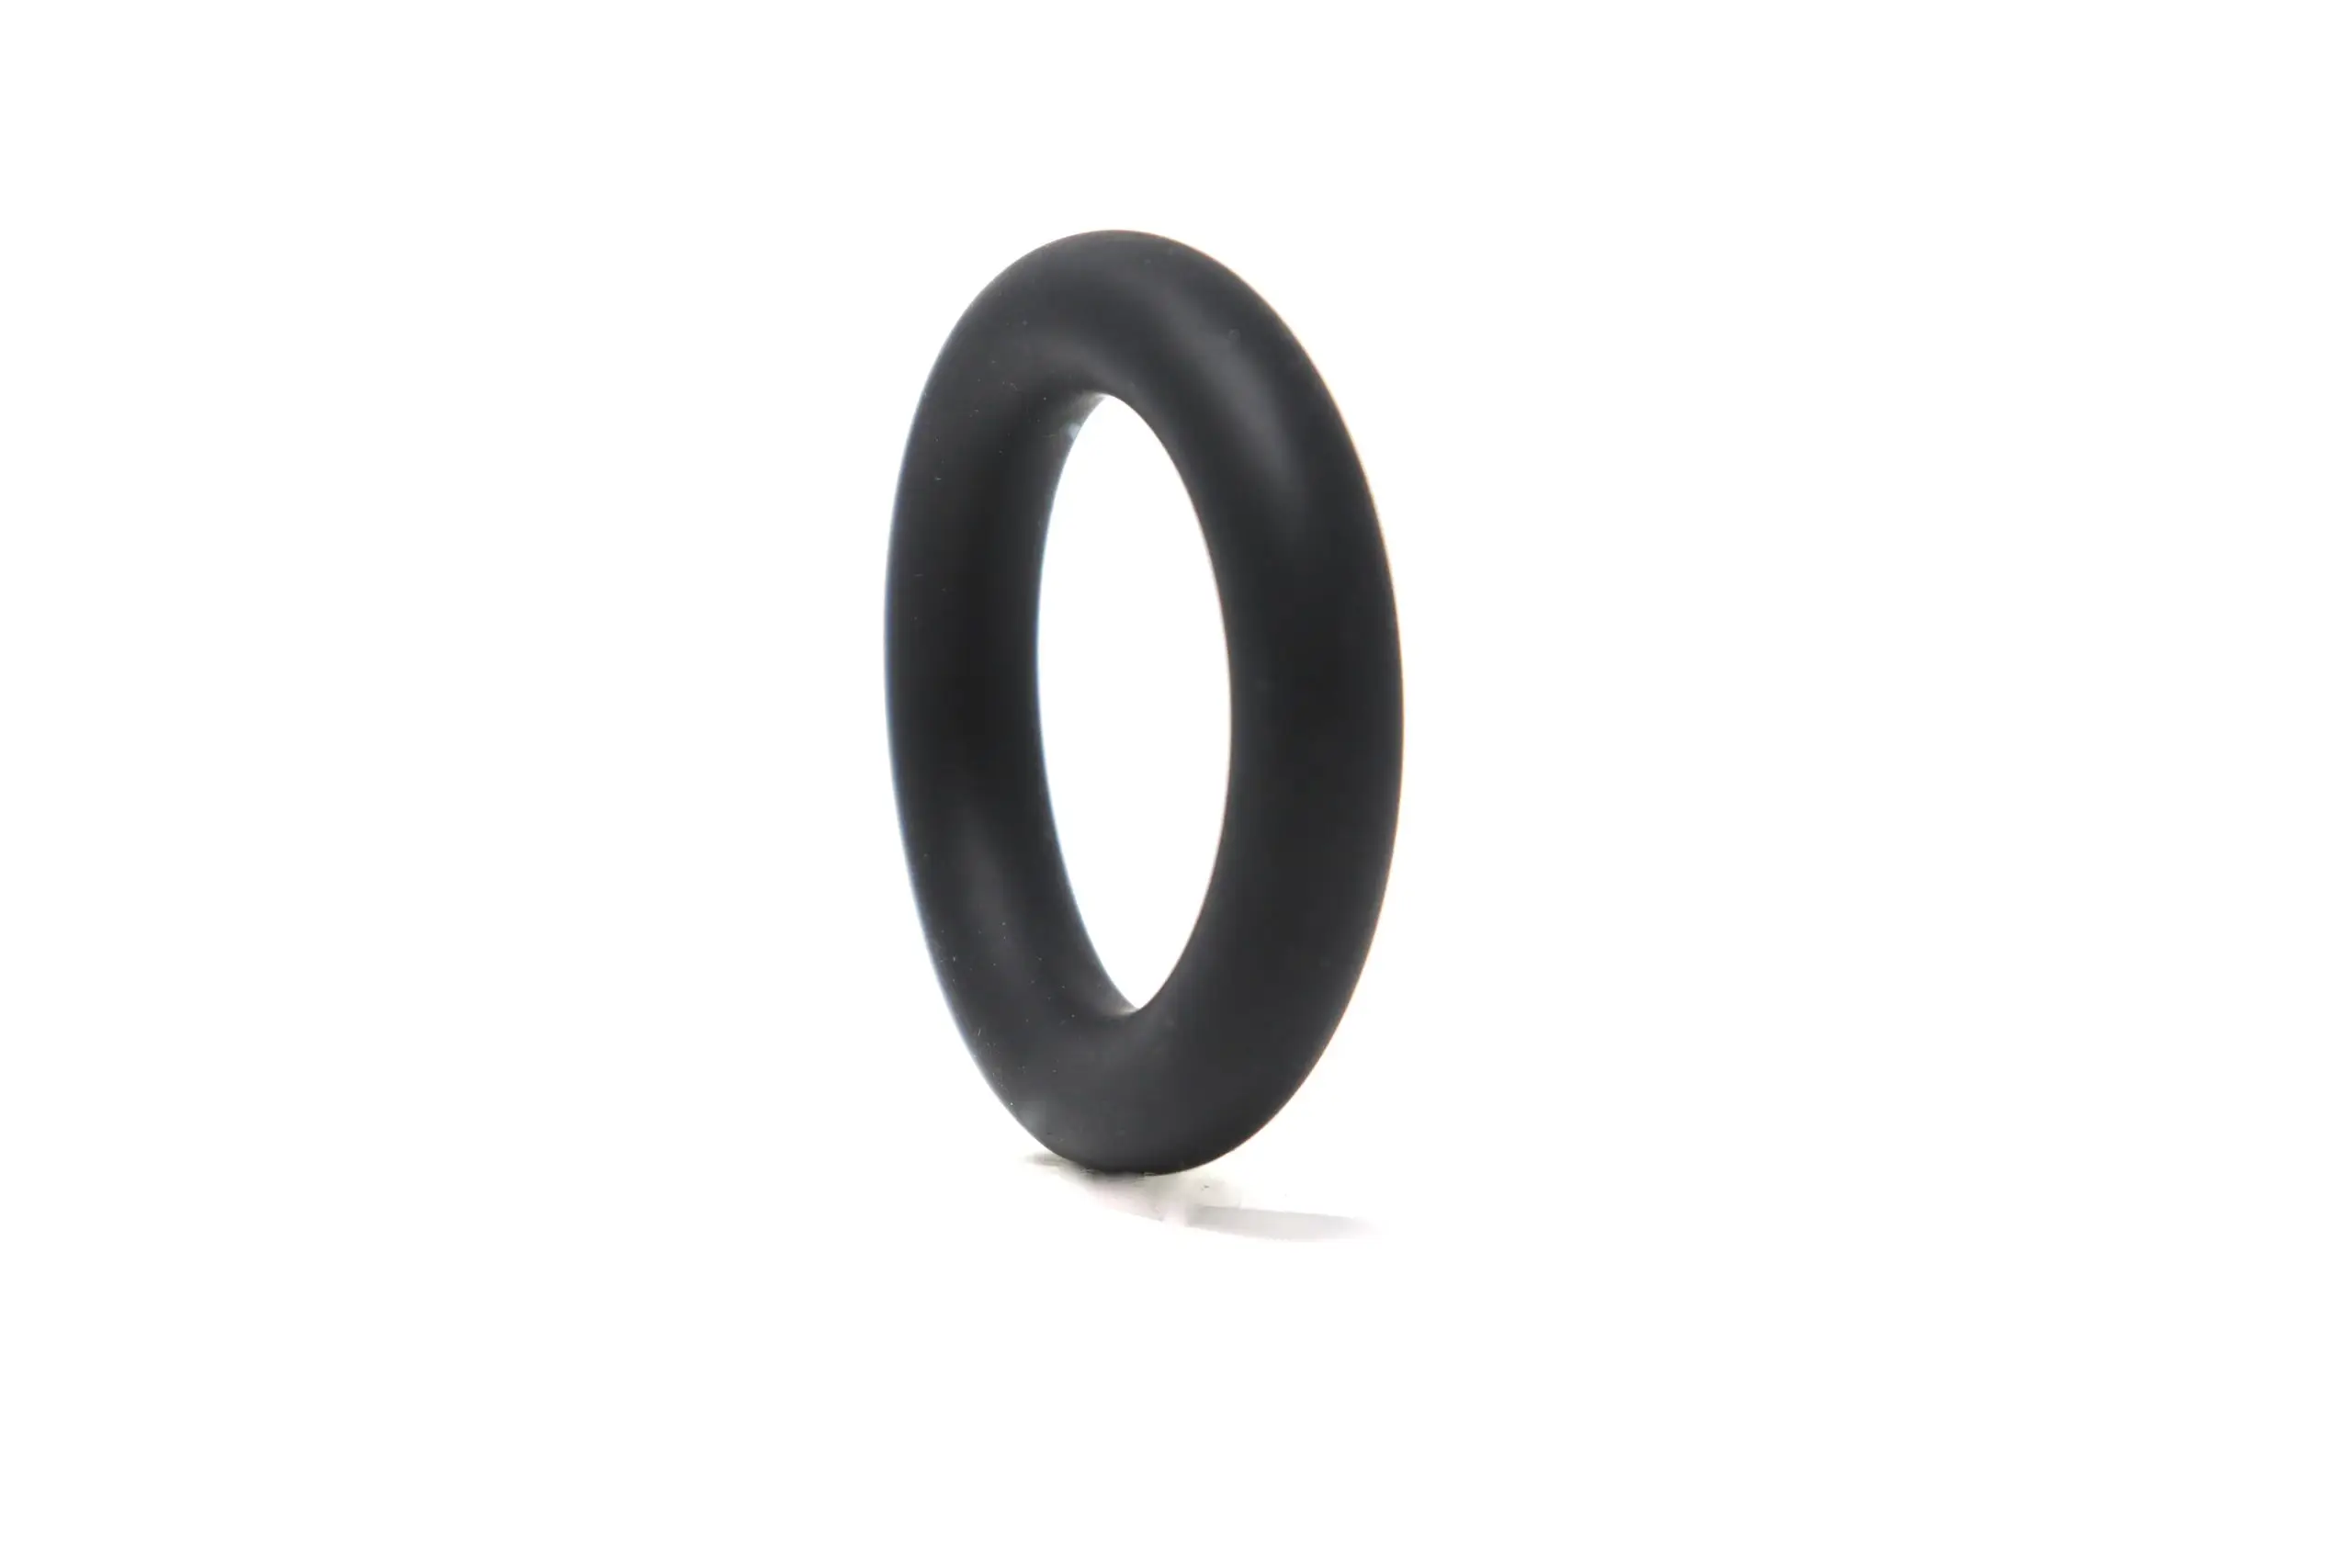 Jack and Jill Gasket Black Silicone Medium-1.5" cock ring